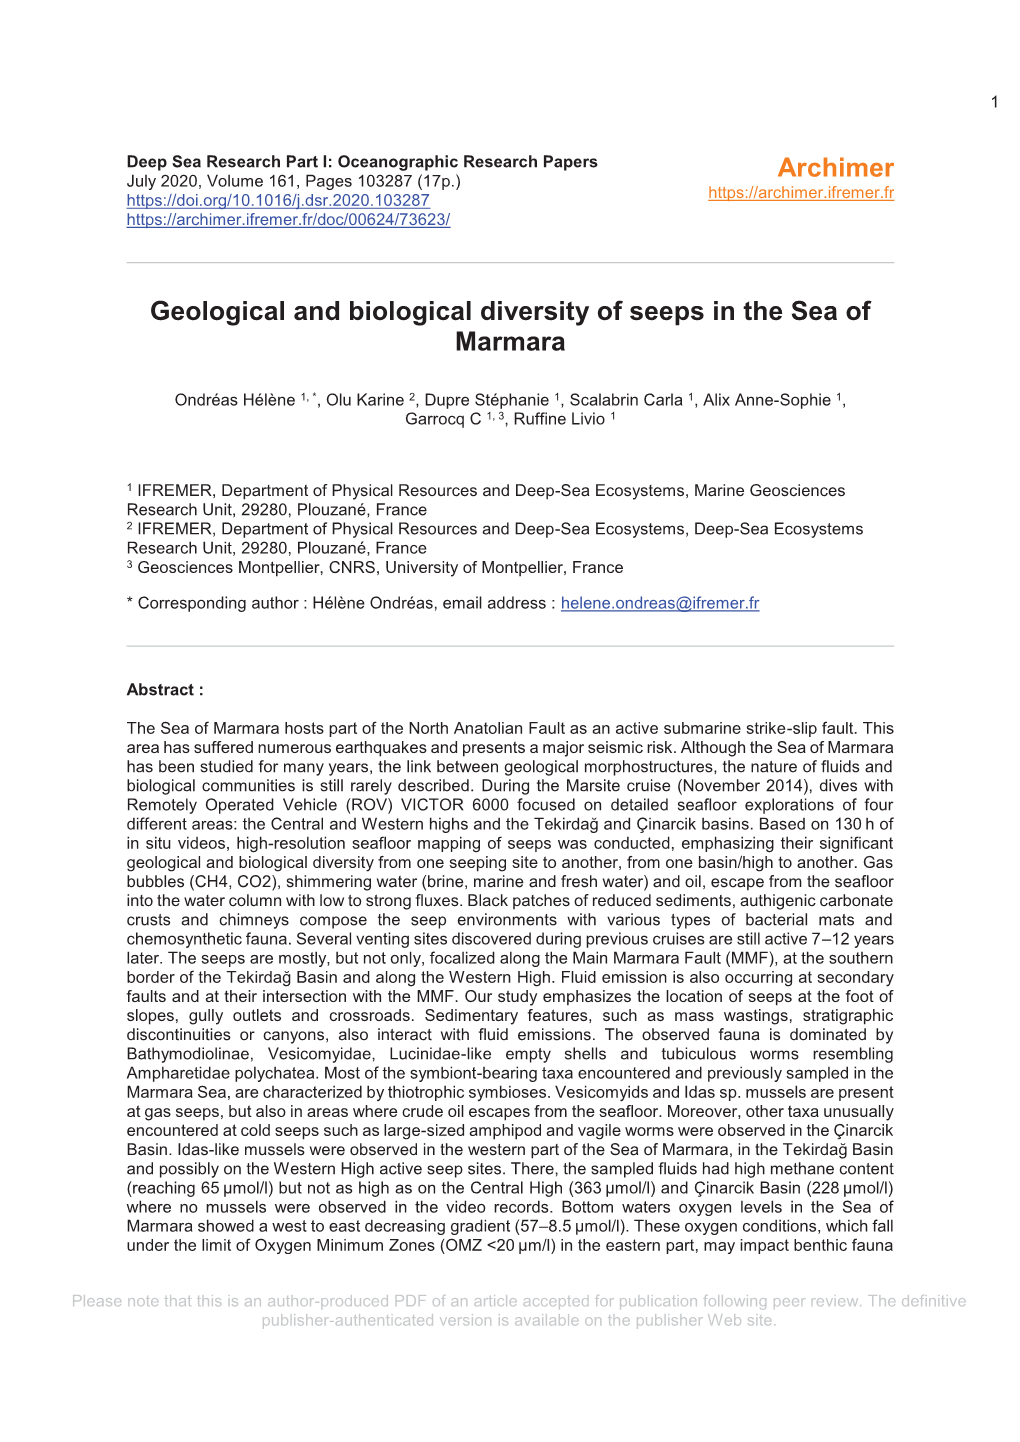 Geological and Biological Diversity of Seeps in the Sea of Marmara